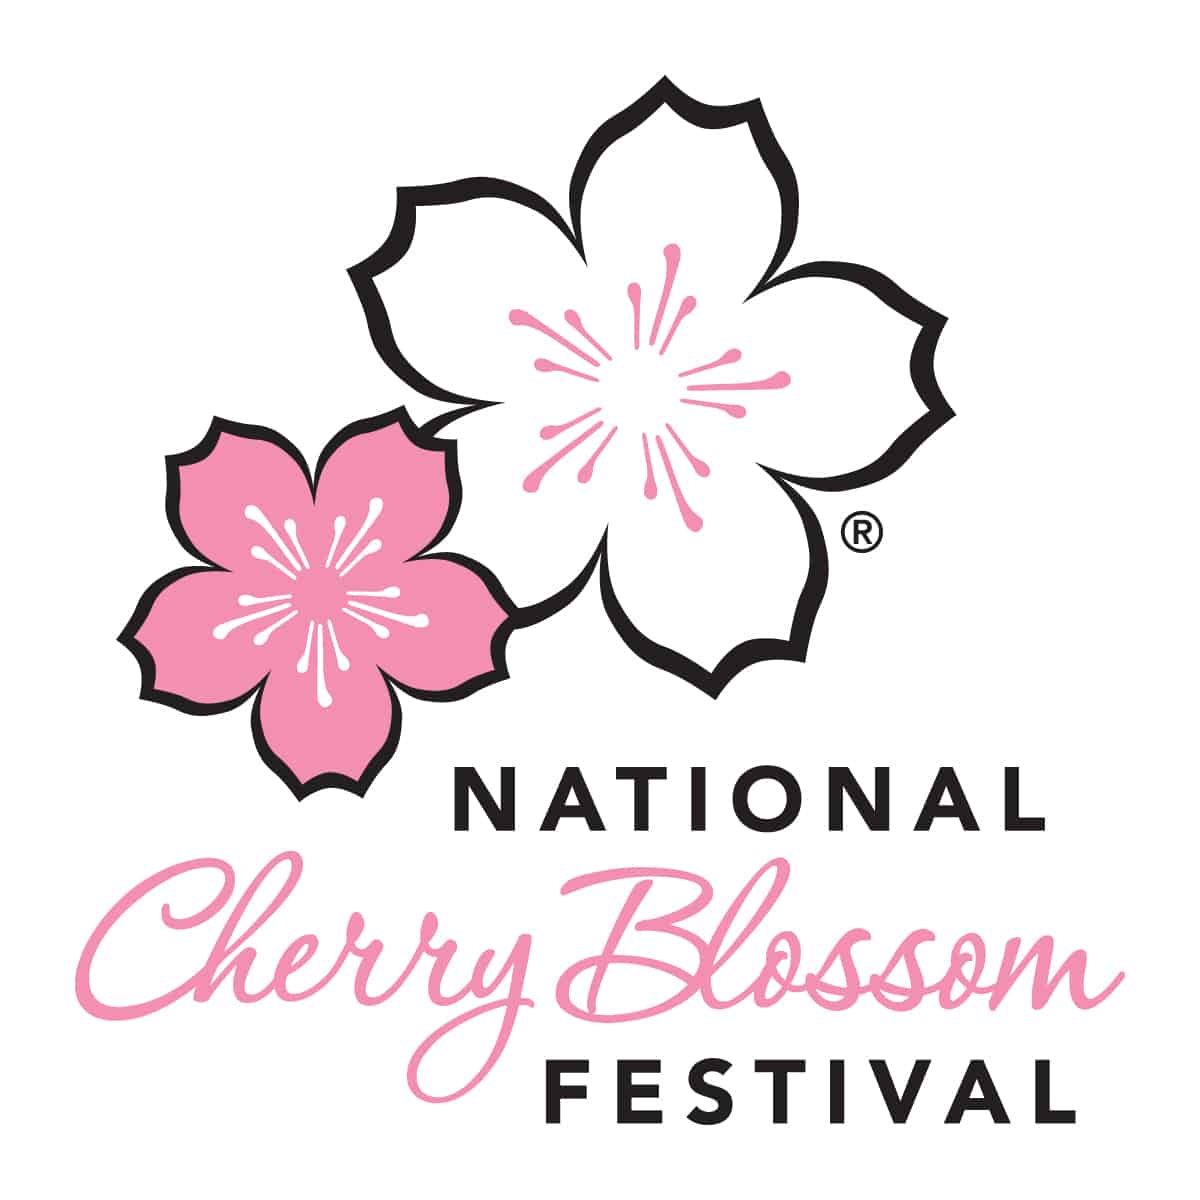 National Cherry Blossom Festival March 20th To April 11th 2021